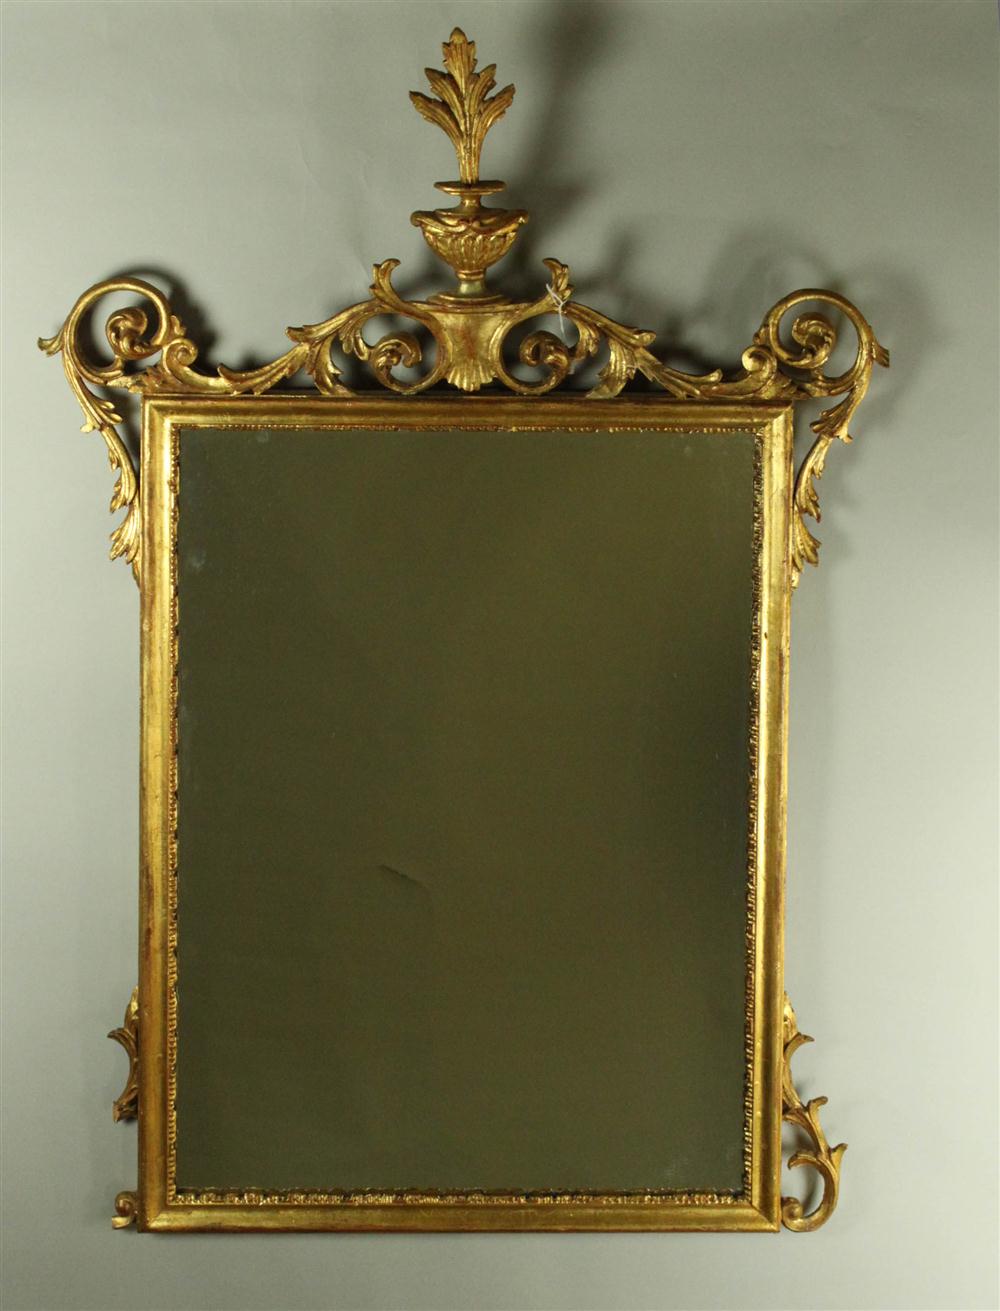 RECTANGULAR MIRROR SURROUNDED BY 1459d2